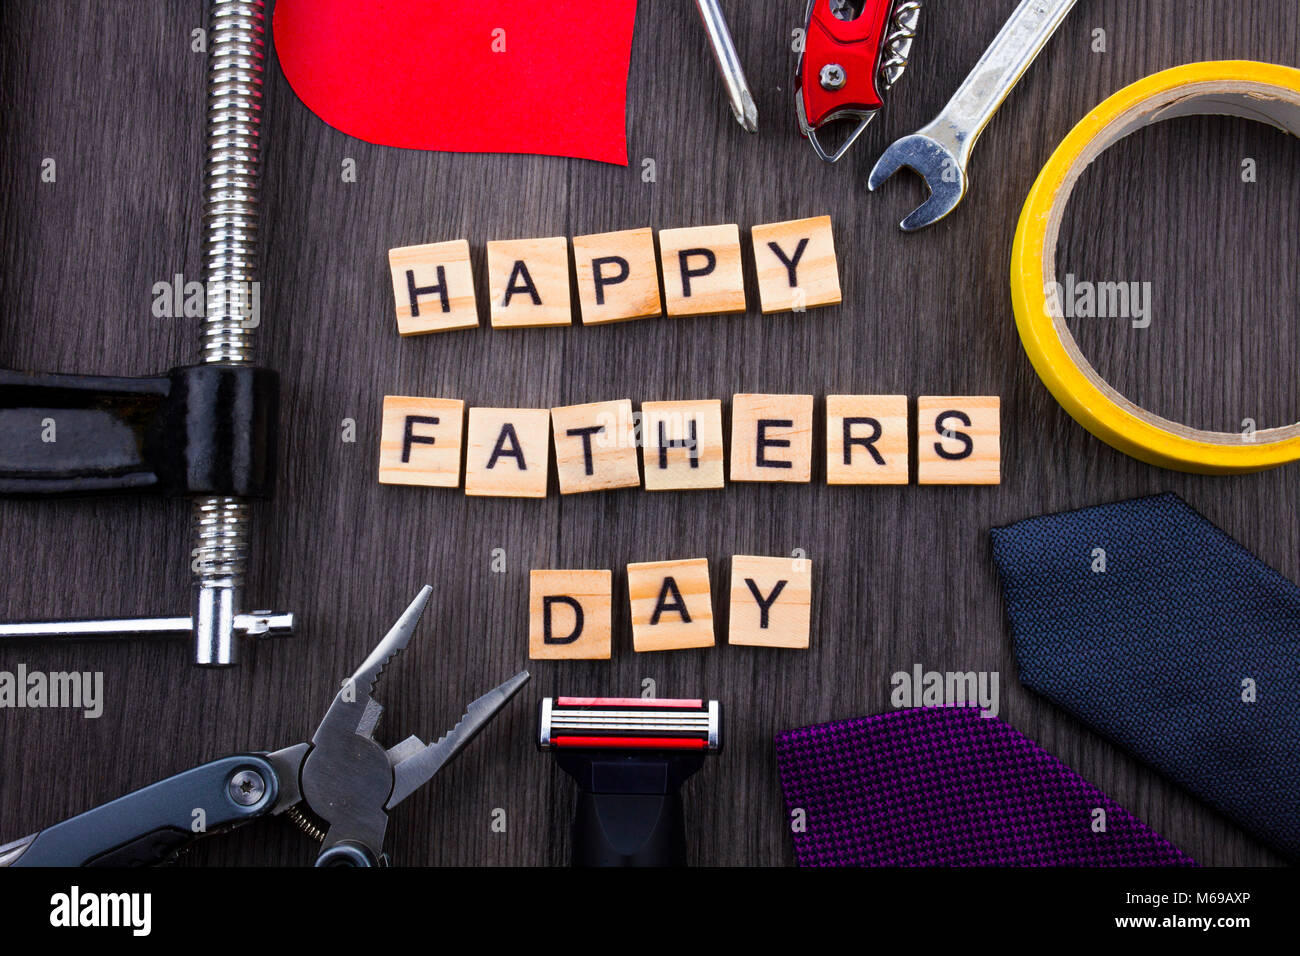 Happy Fathers Day message on a wooden background with frame of tools and ties. Stock Photo